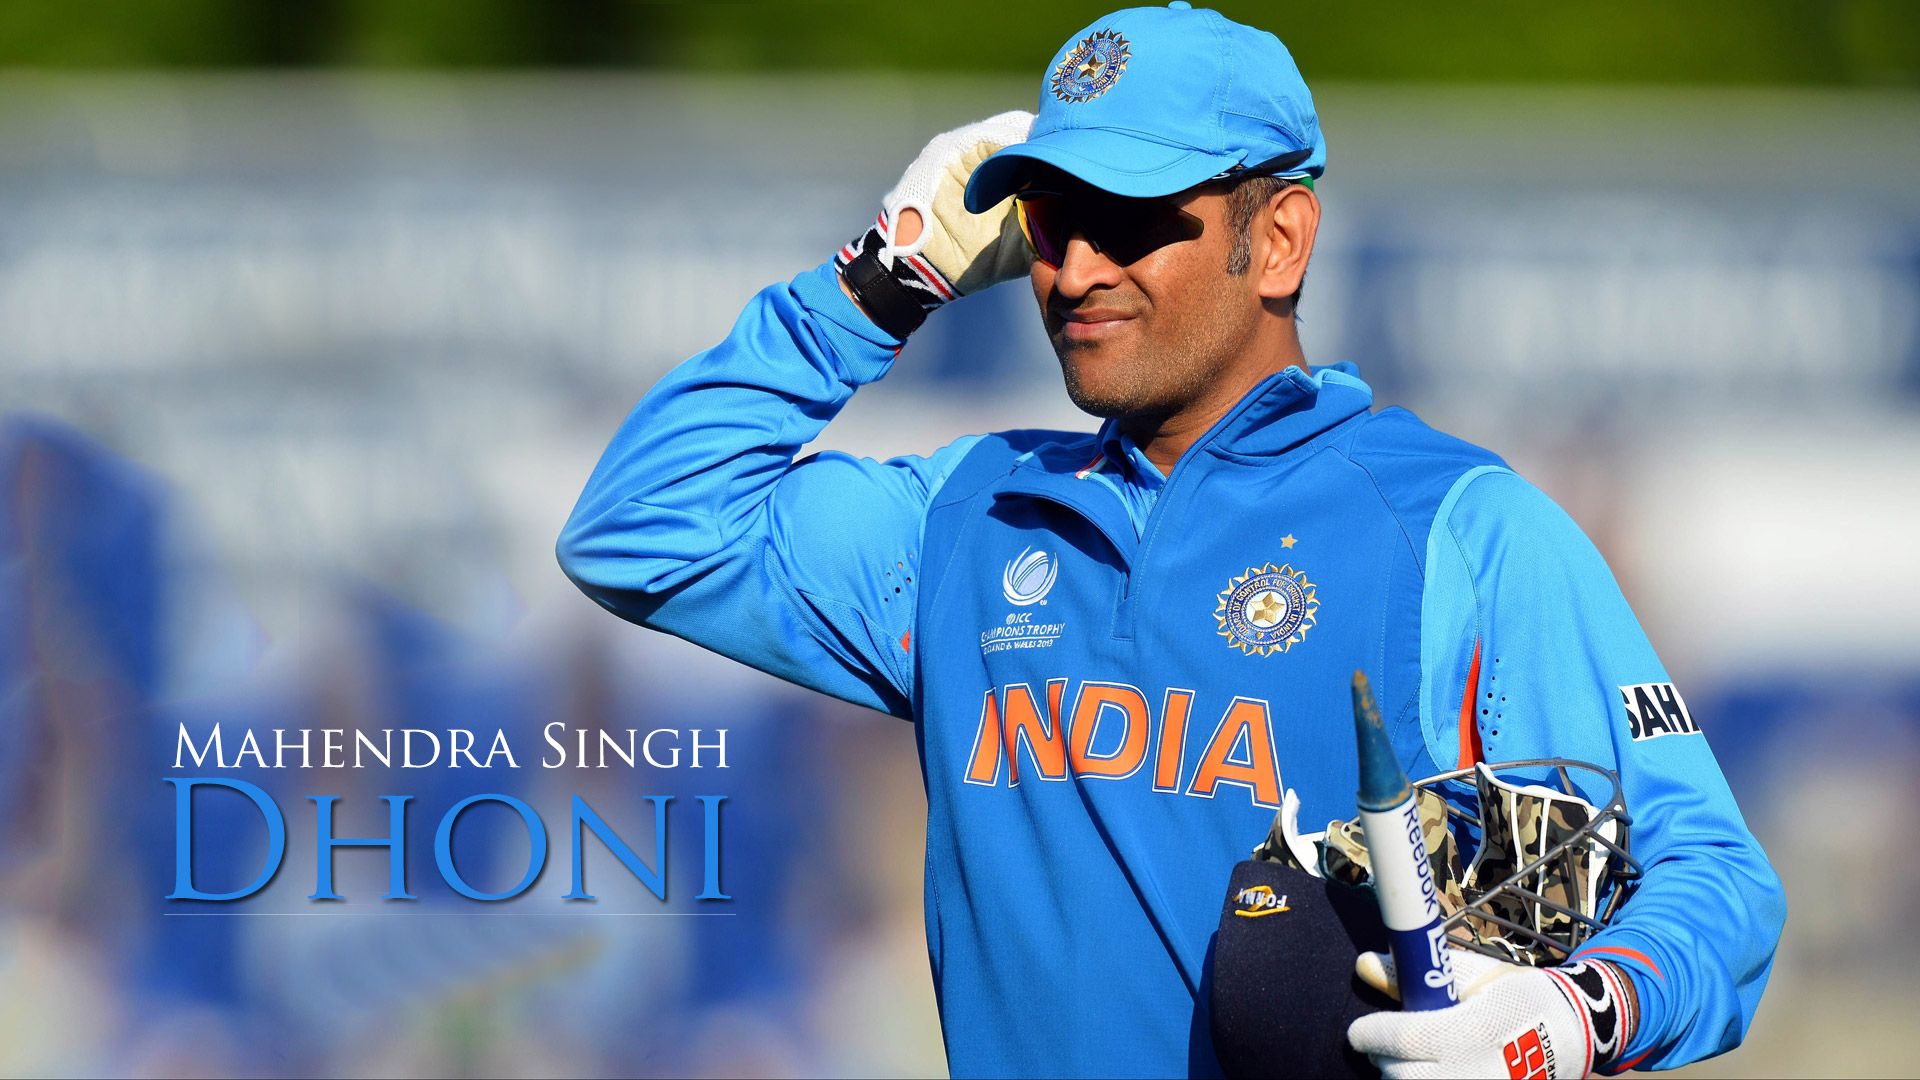 M.S. Dhoni Wallpaper High Resolution and Quality Download